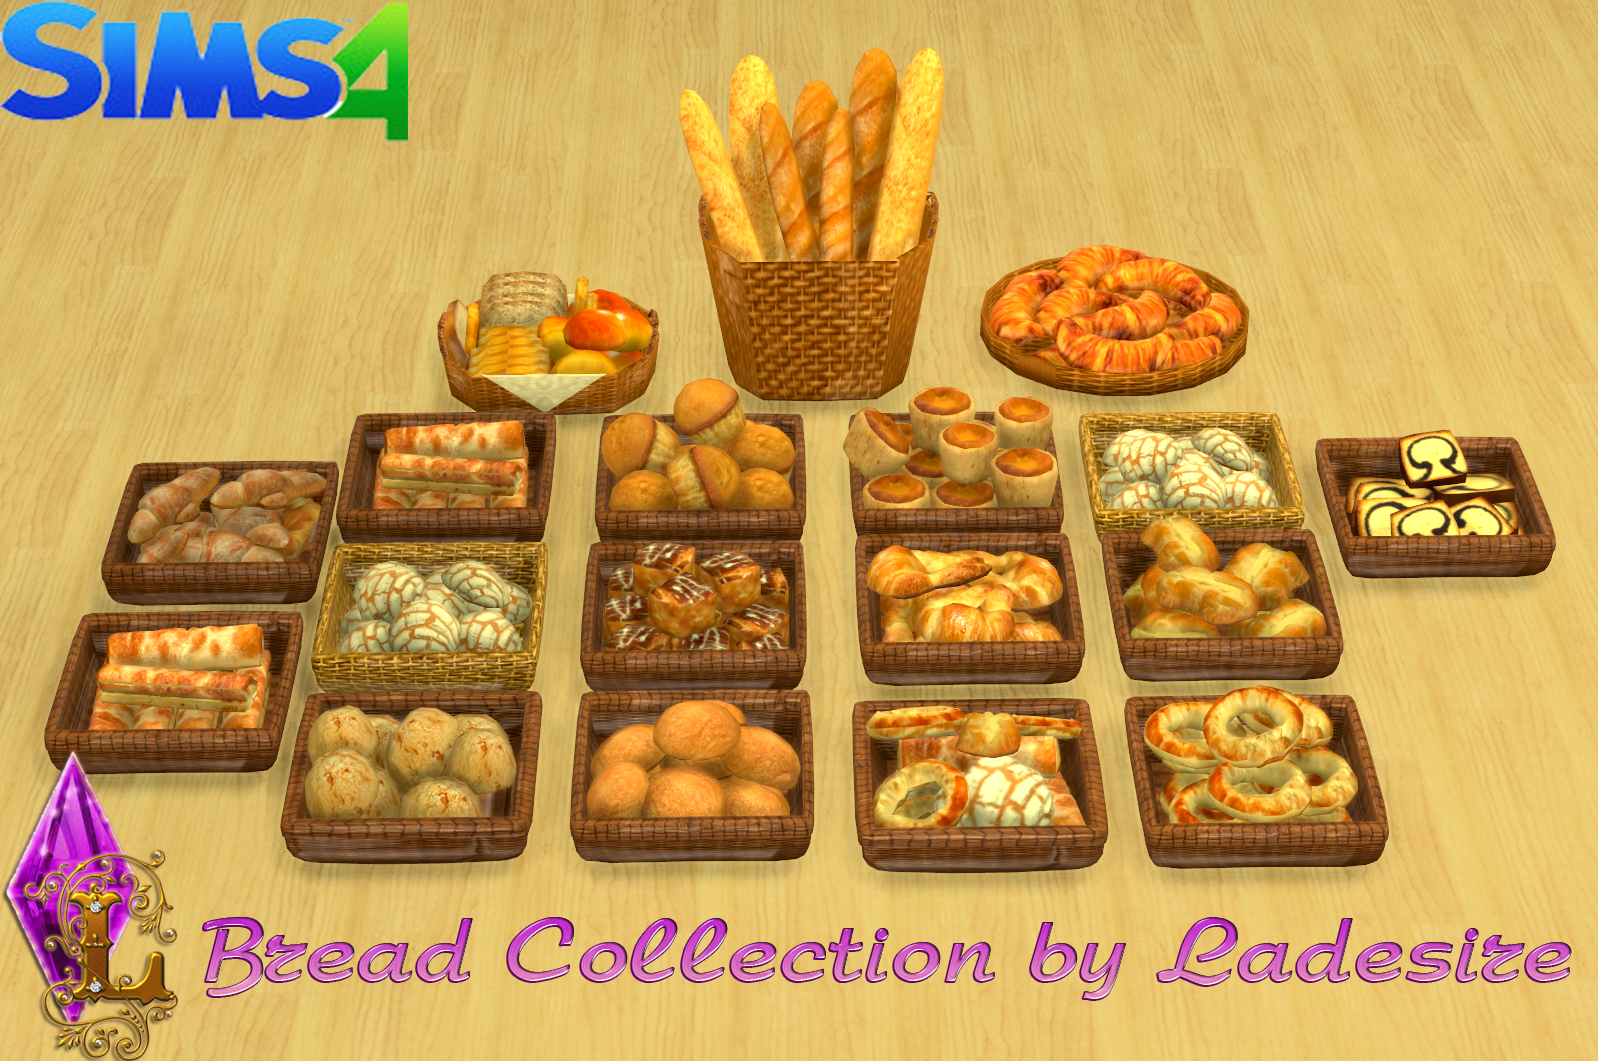 Sims 4 more food mod pack